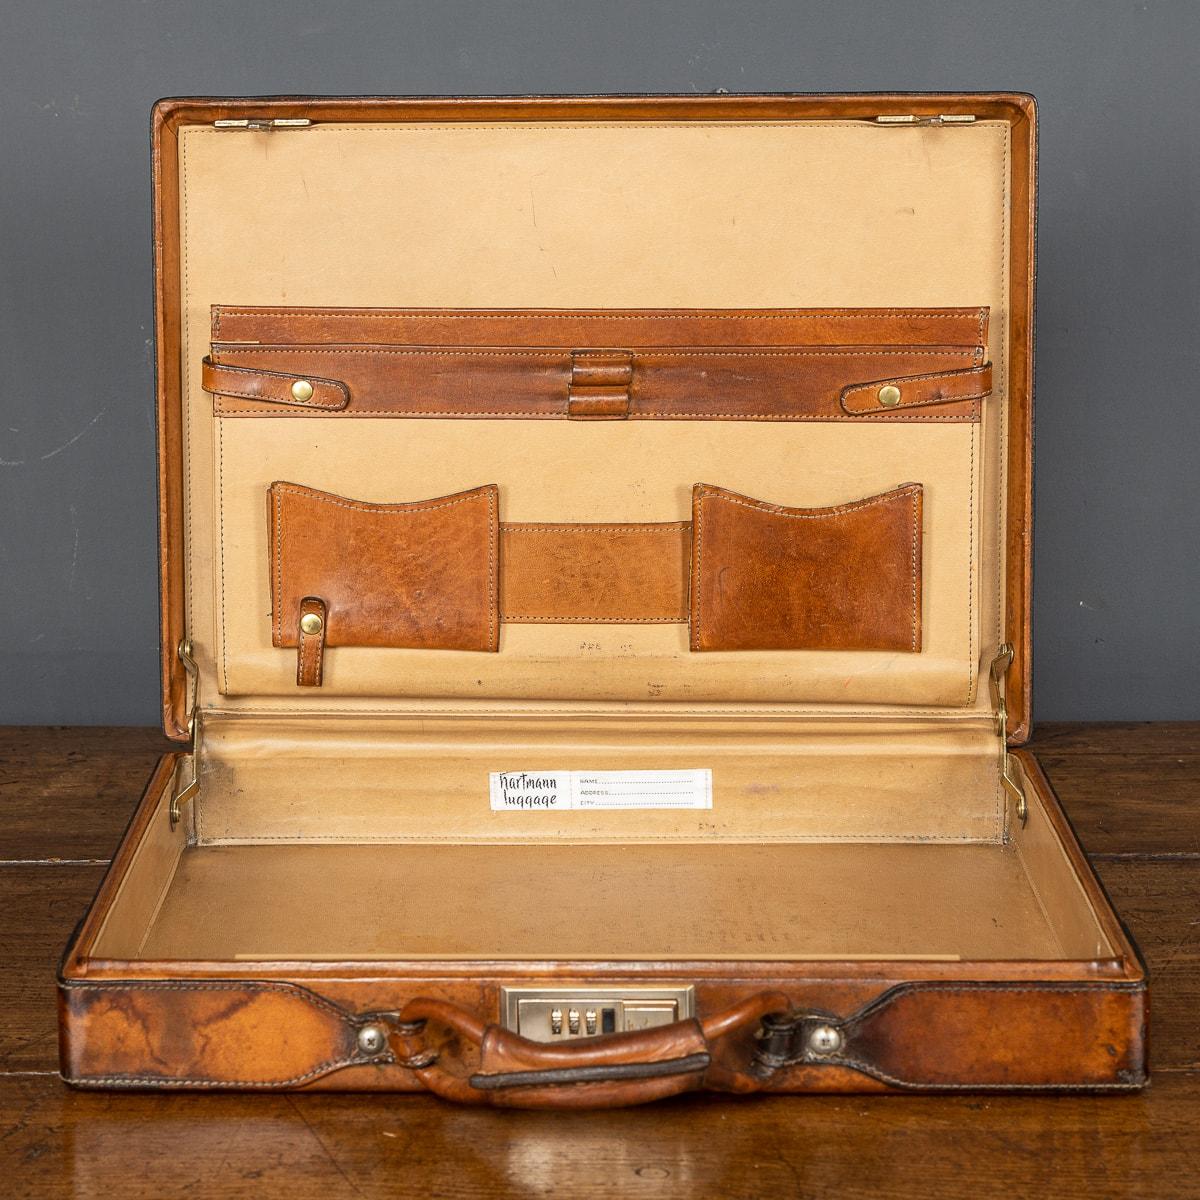 20th Century American Leather Briefcase by Hartmann, circa 1920 For Sale 1